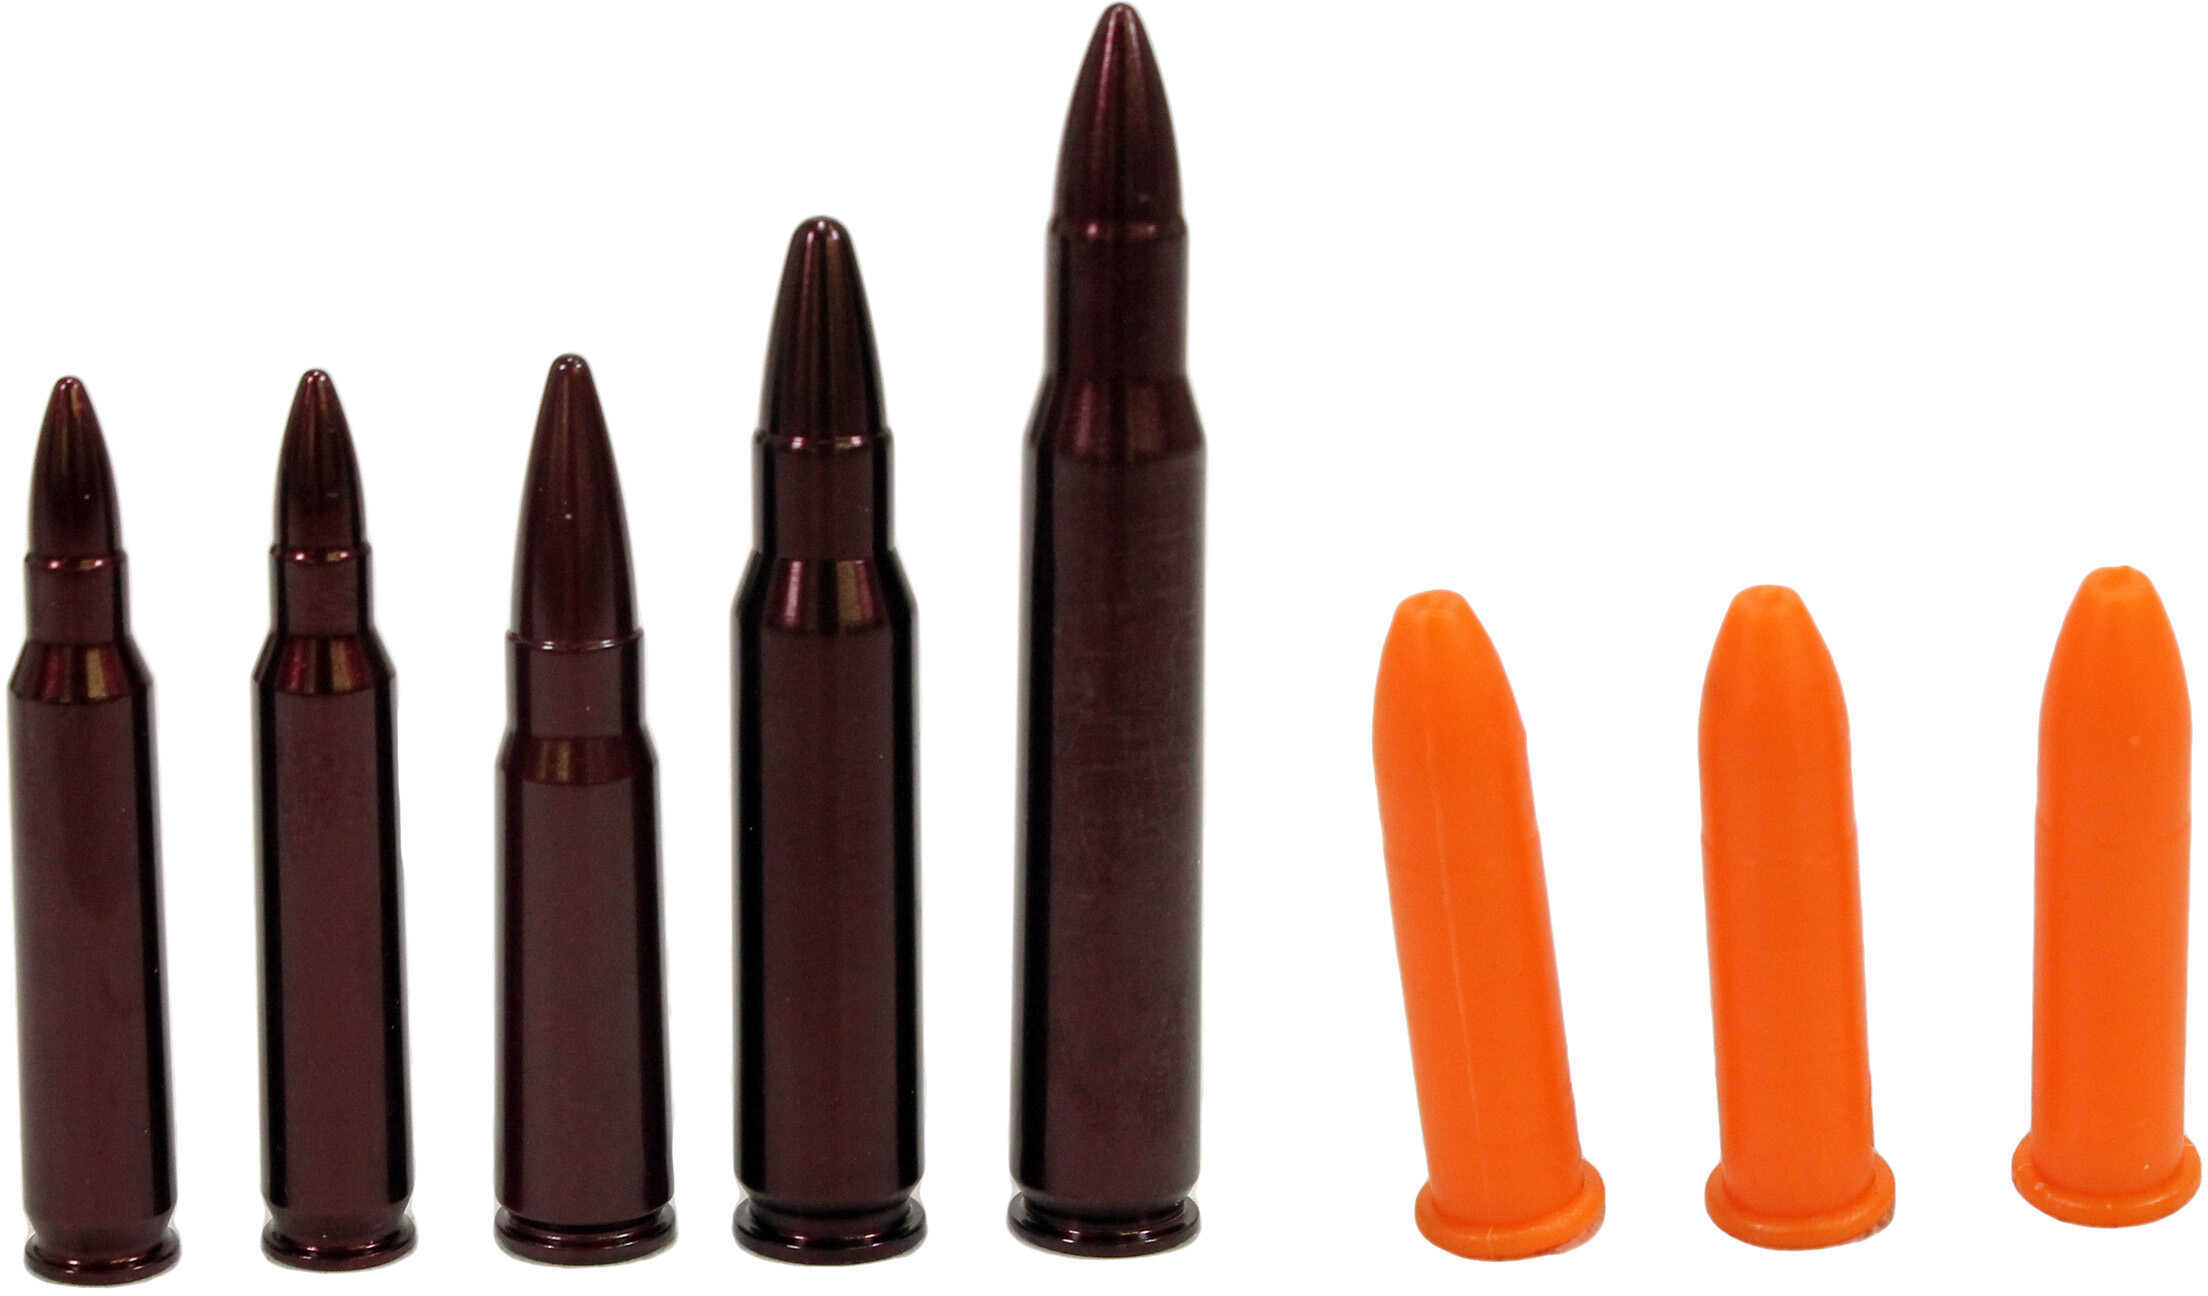 A-Zoom Rifle Metal Snap Caps Calibers (Variety Pack) Md: 16195